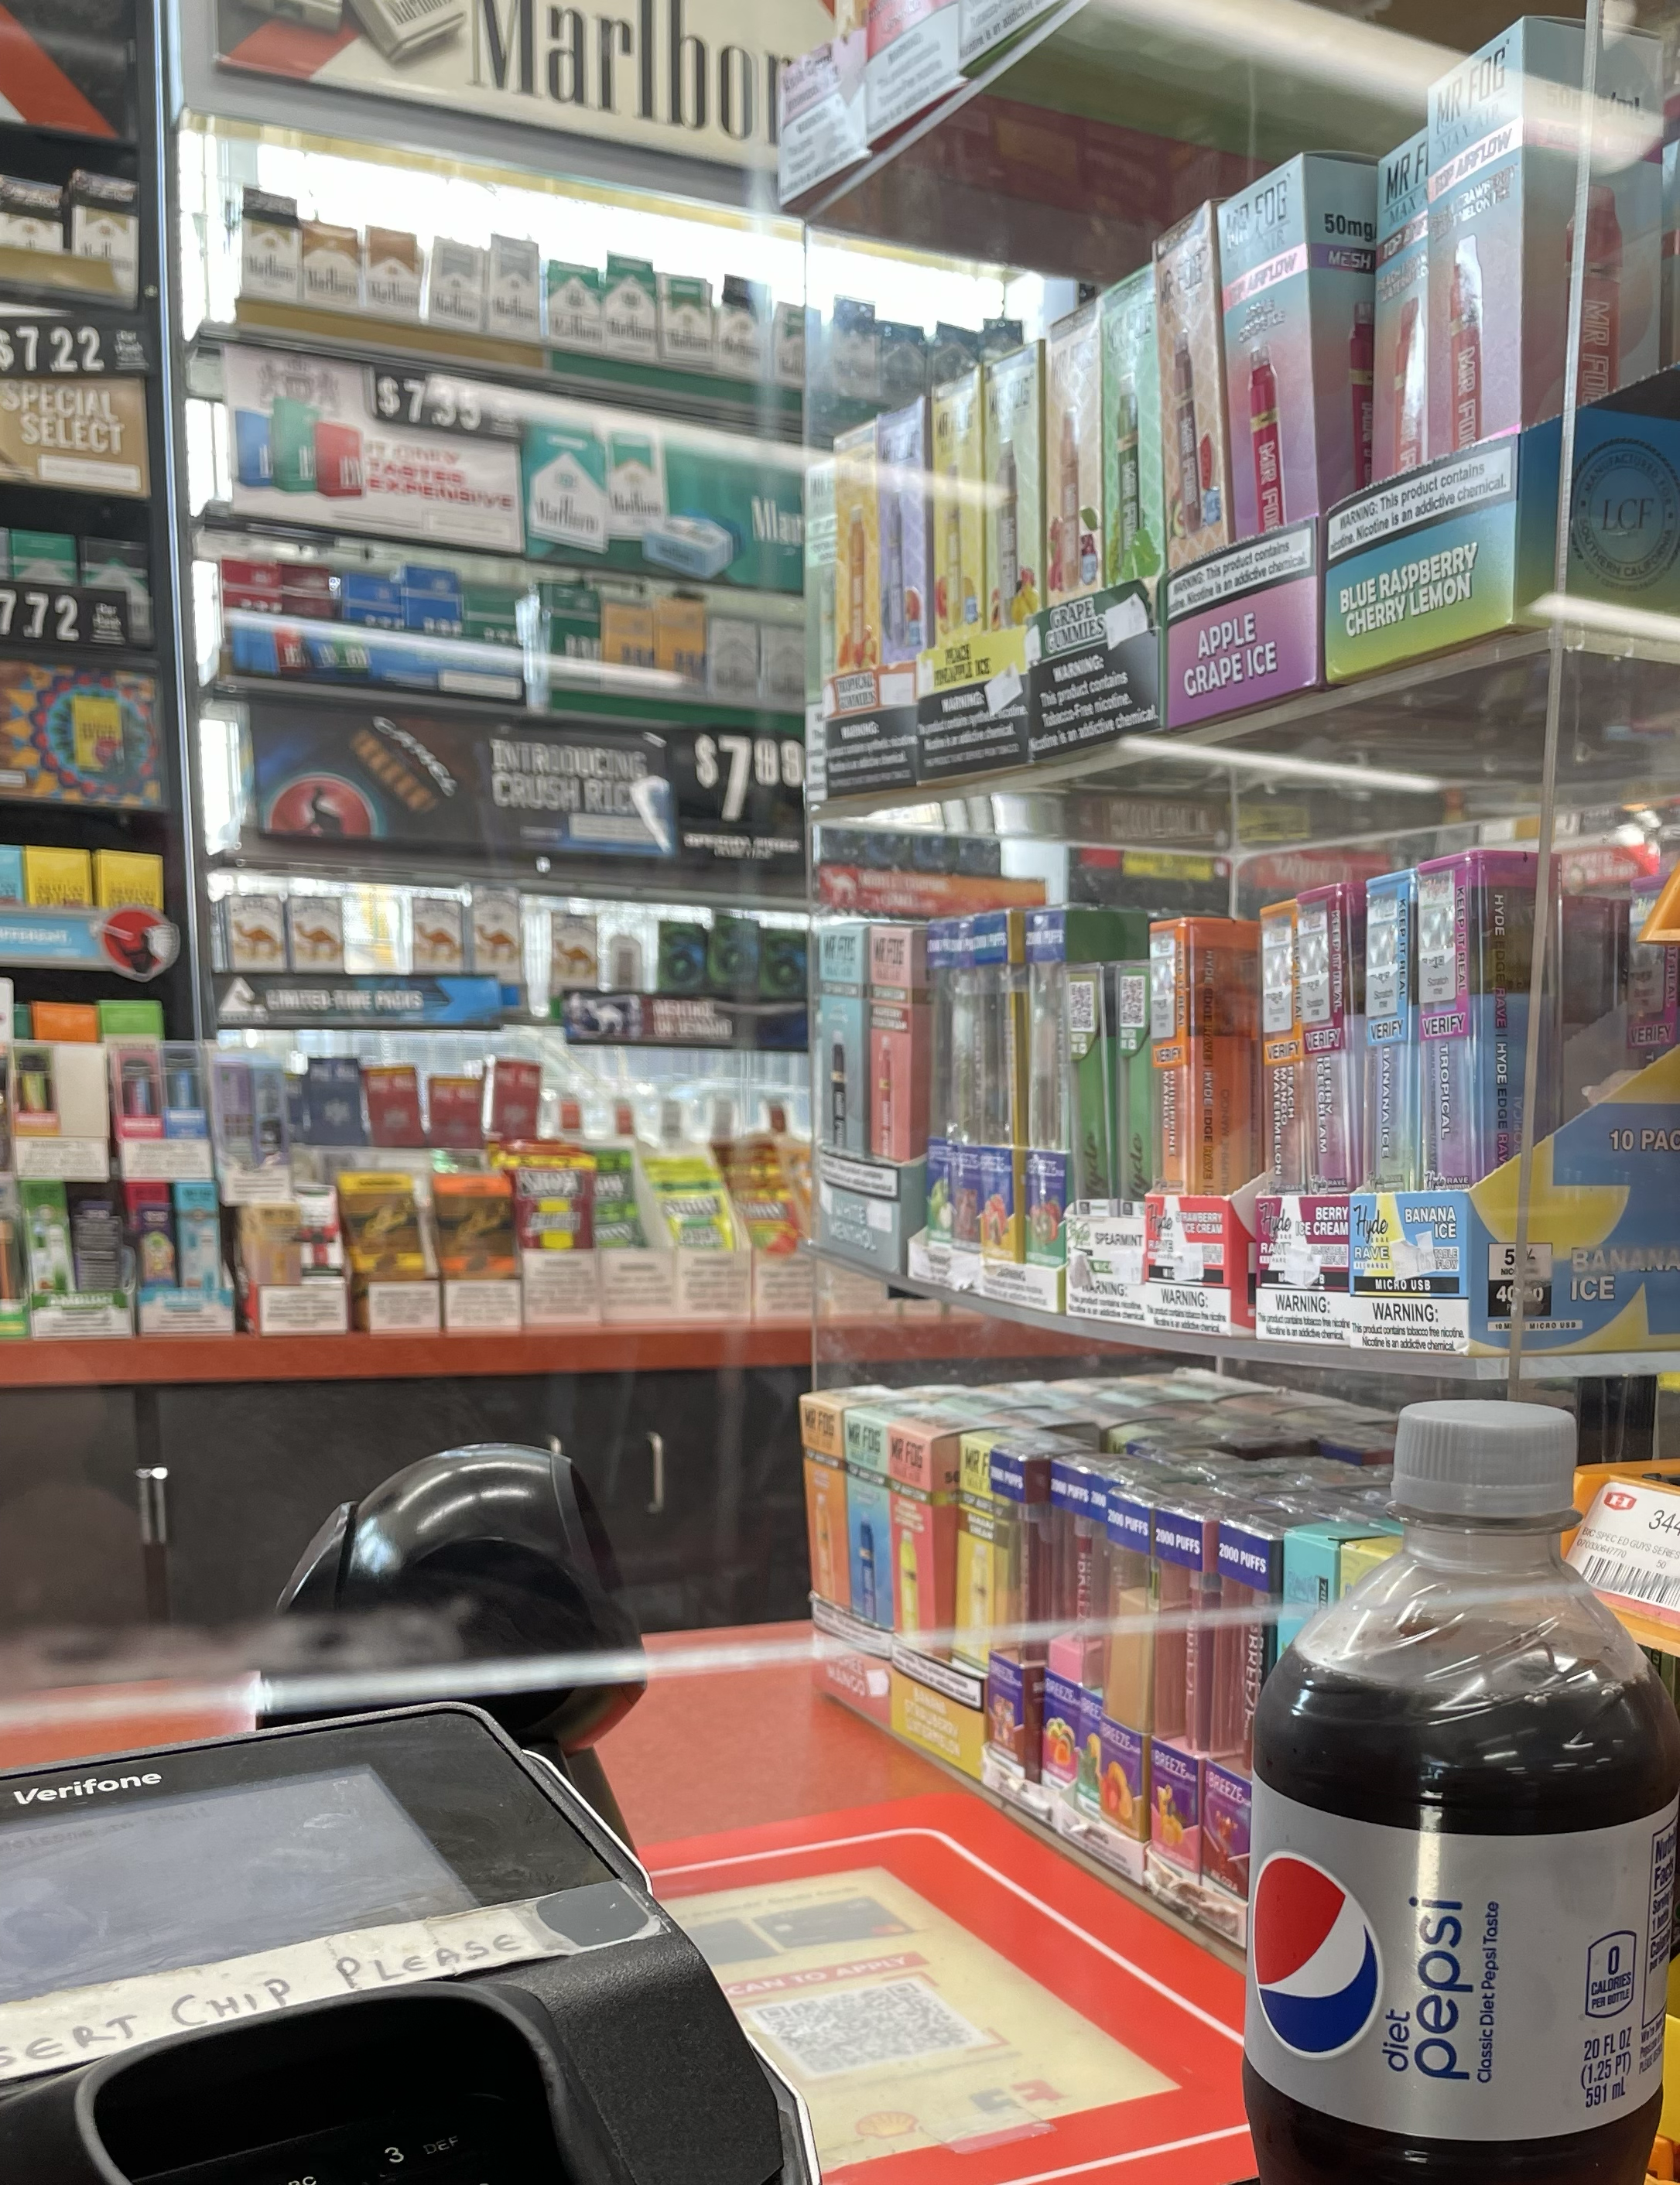 flavored e-cig and other tobacco product display behind the counter 